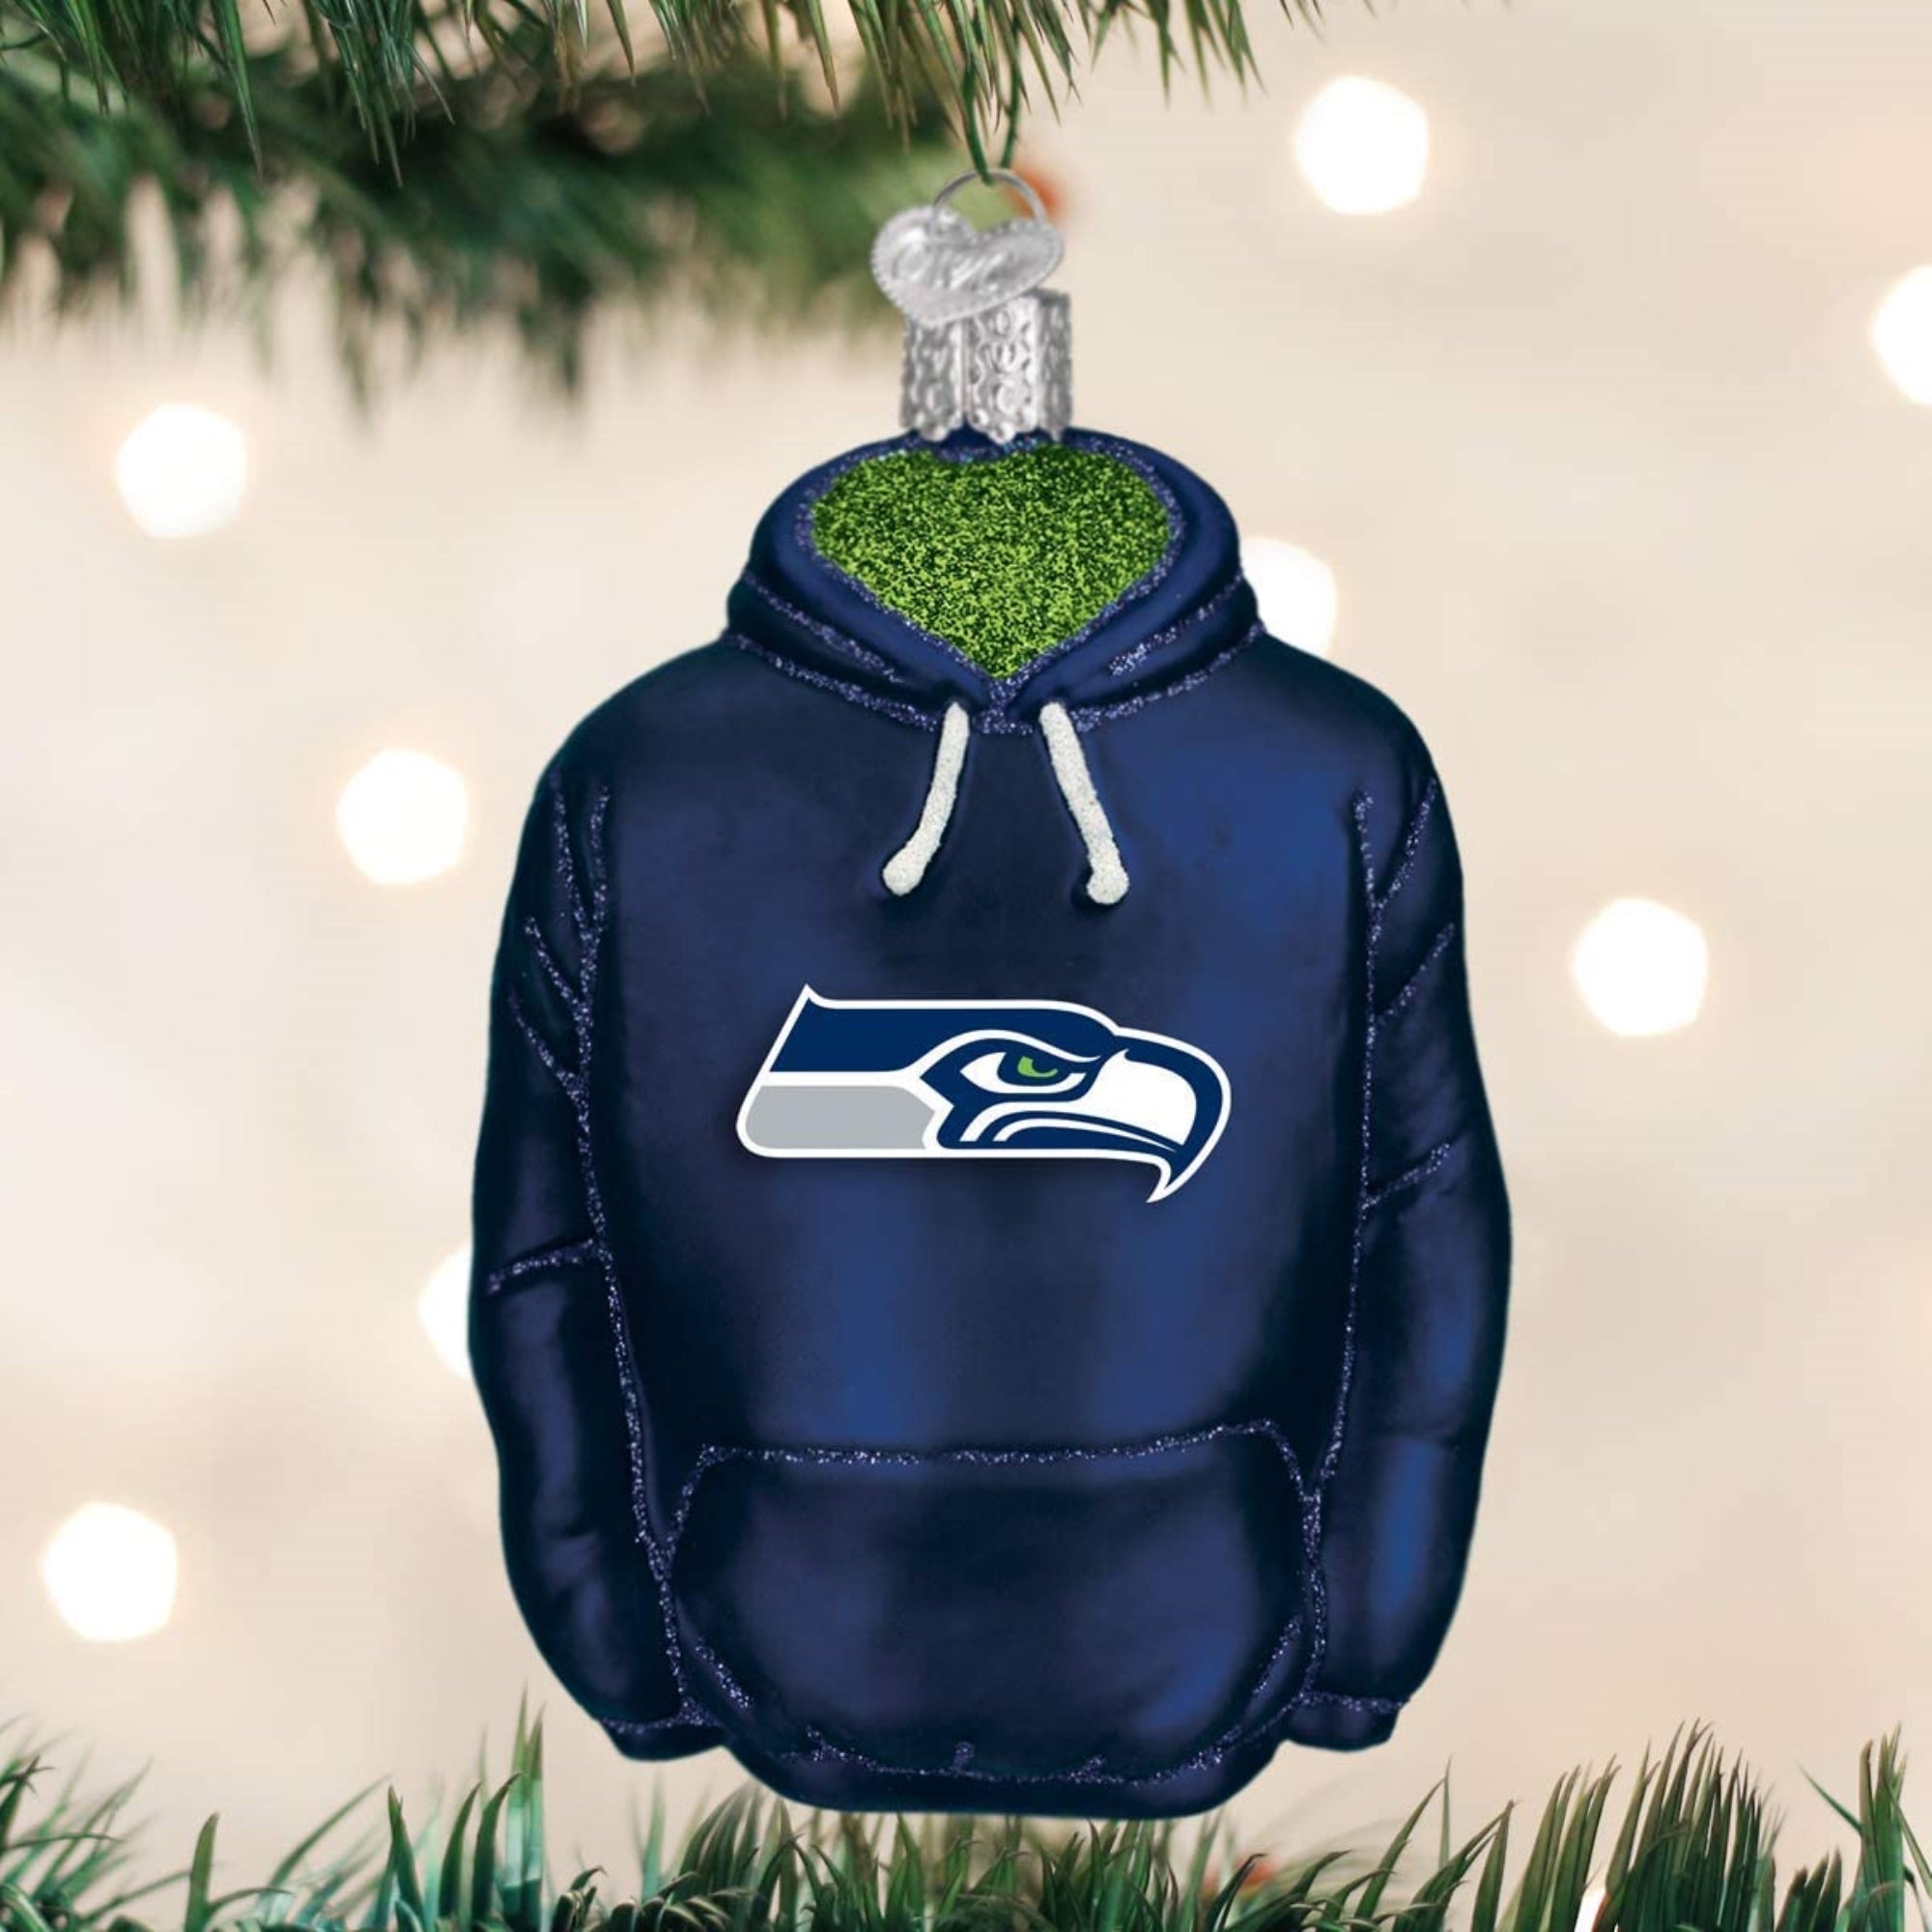 Old World Christmas Seattle Seahawks Hoodie Ornament For Christmas Tree